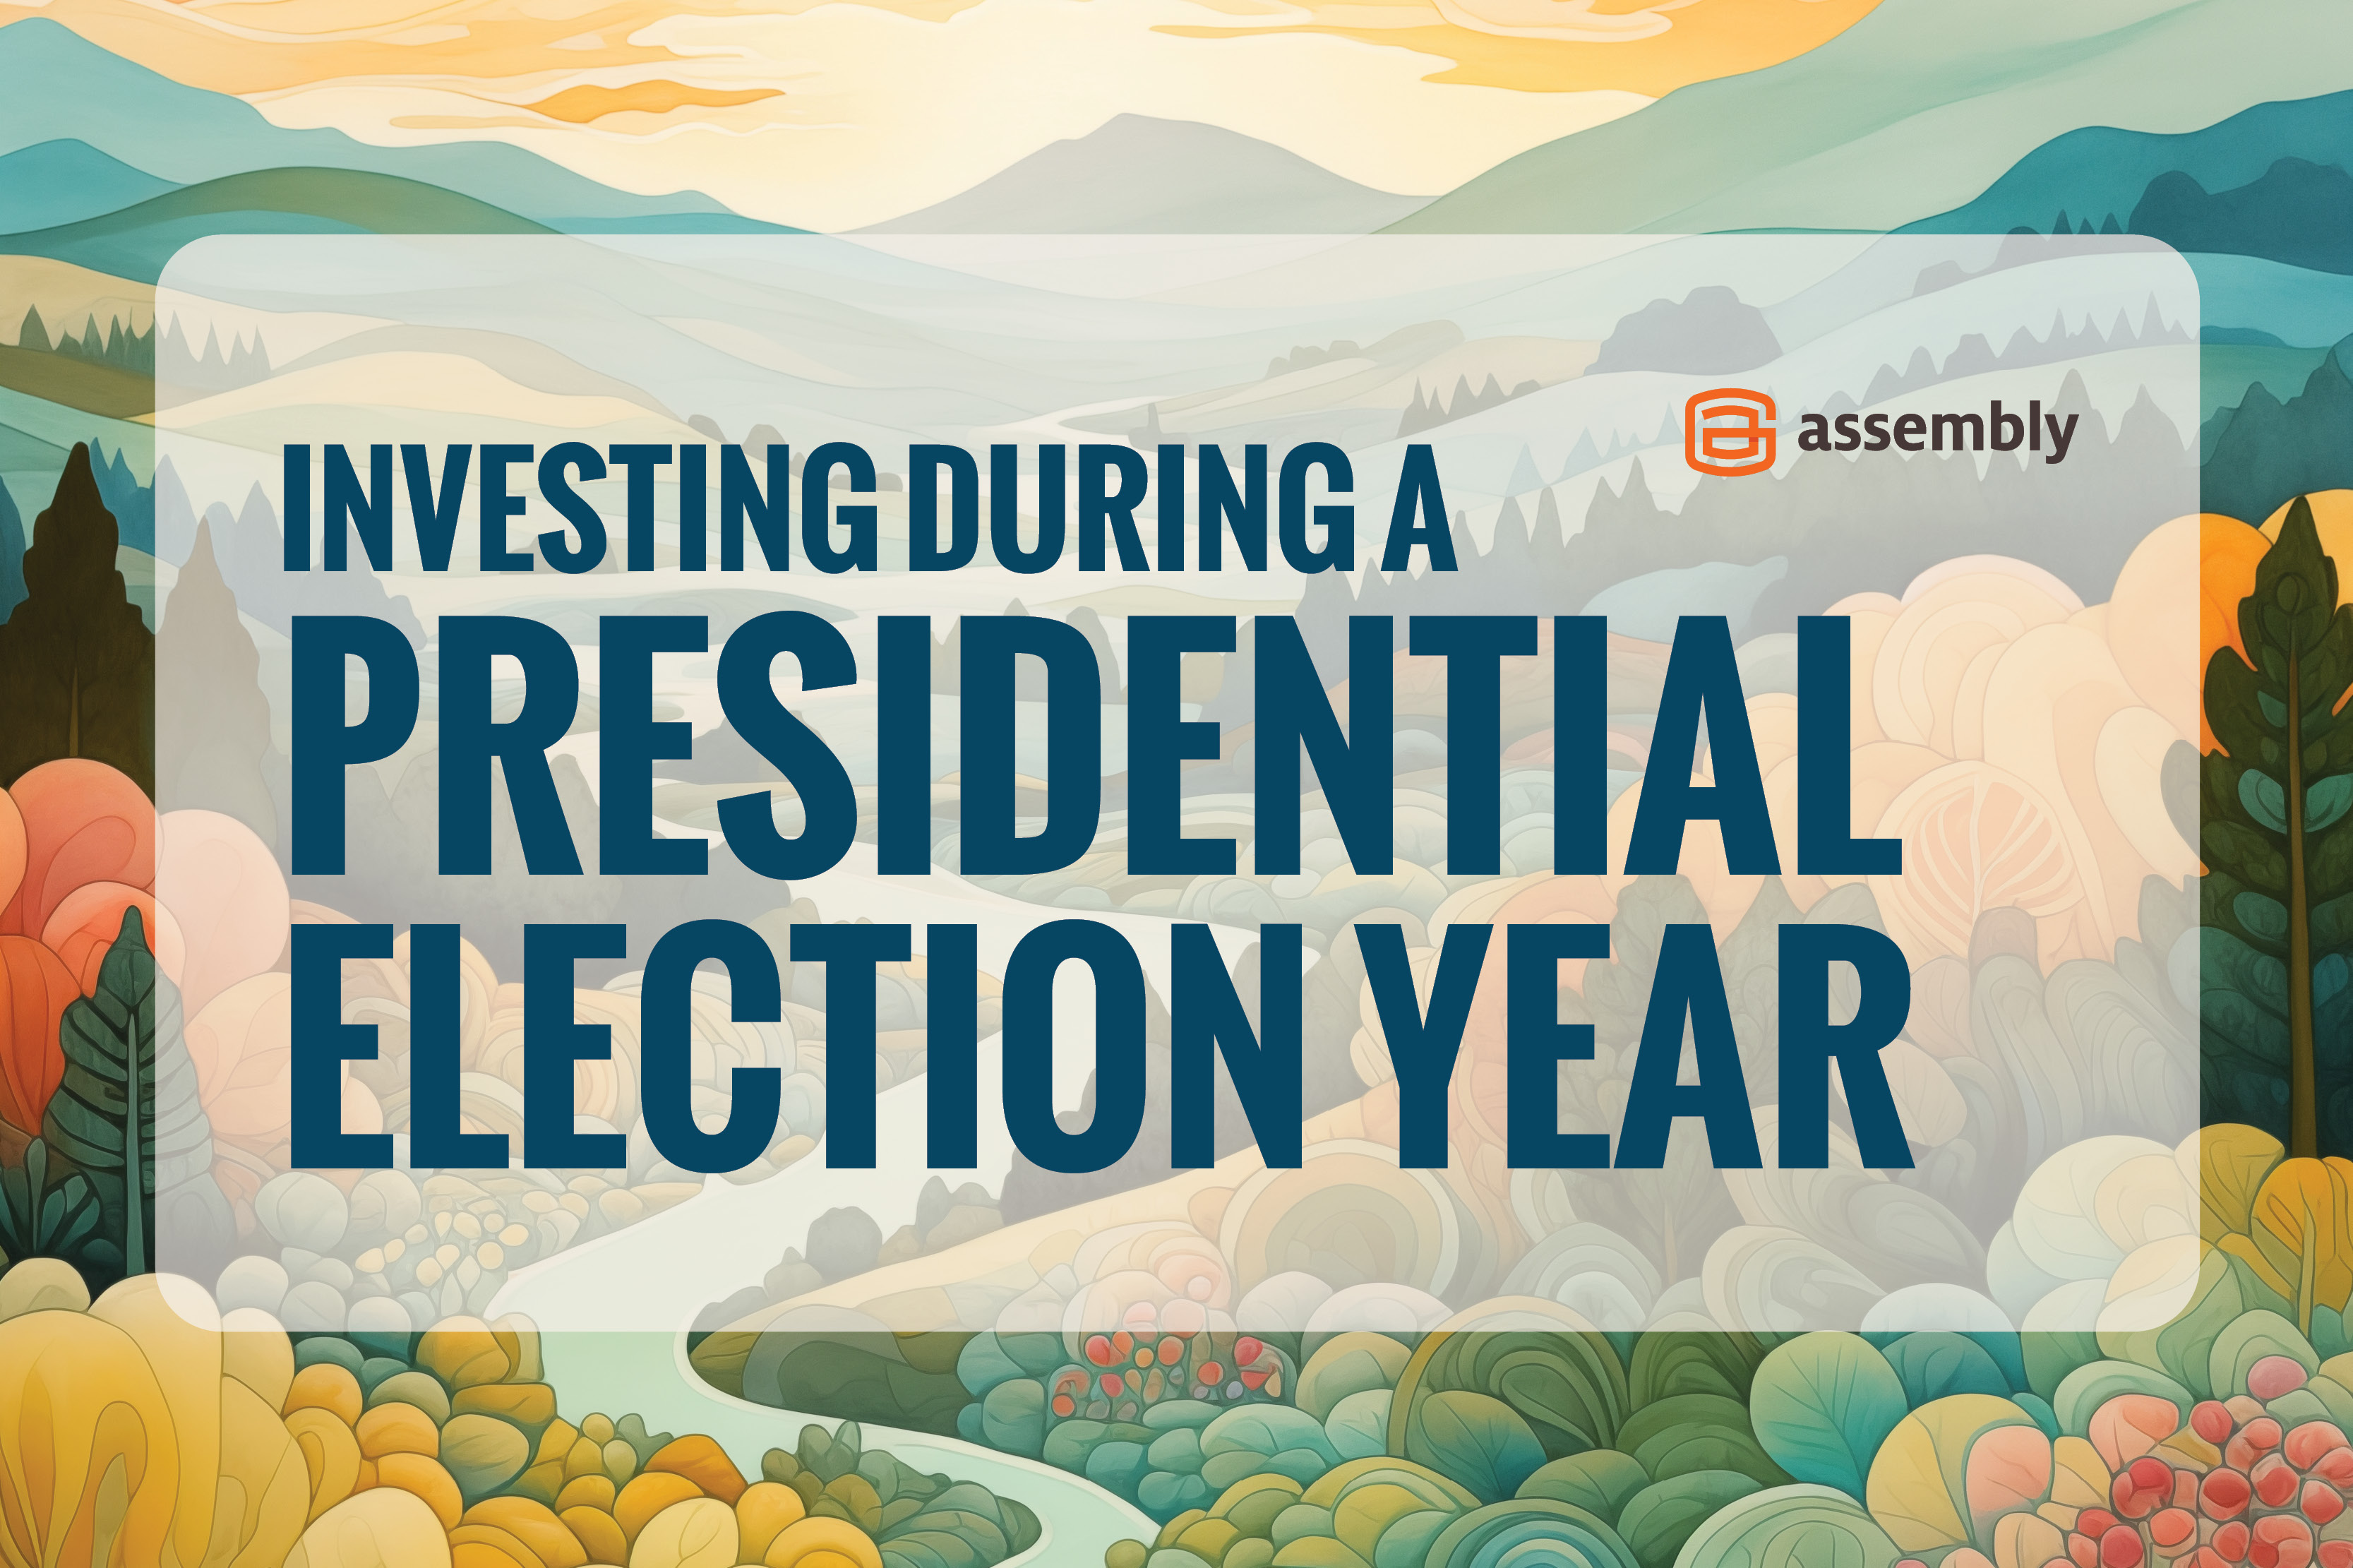 Investing during a presidential election year